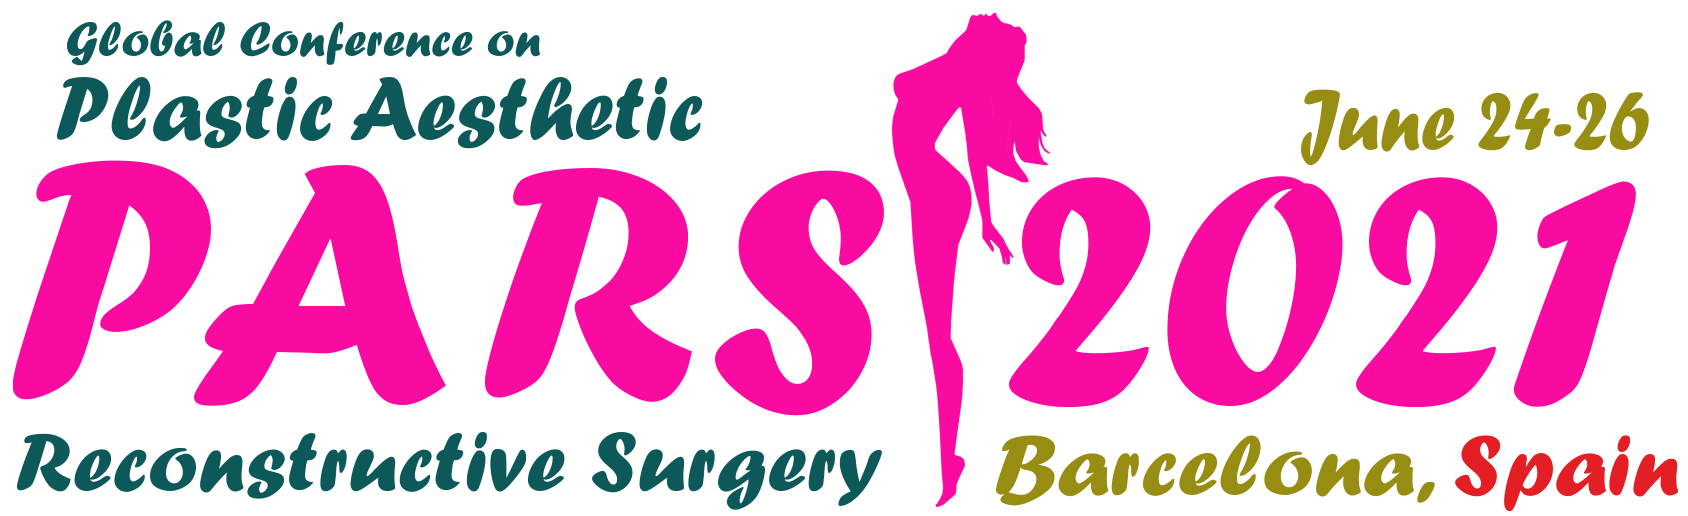 Global Conference on Plastic Aesthetic and Reconstructive Surgery (PARS 2021)